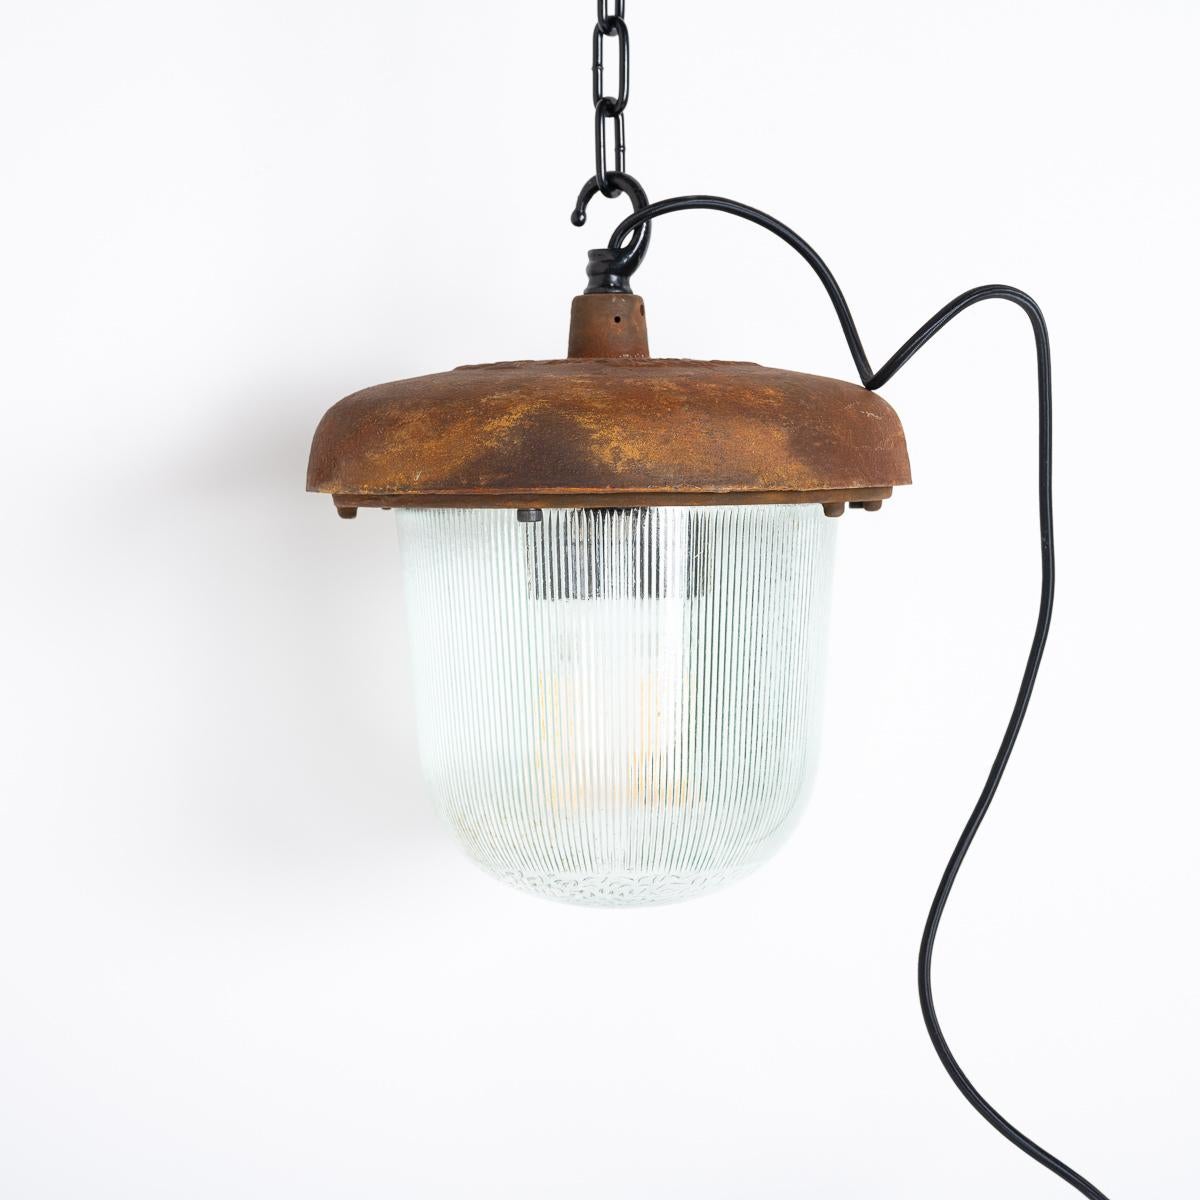 Cast Large Industrial Rusted Pendant Lights Reclaimed From The Eastern Bloc For Sale